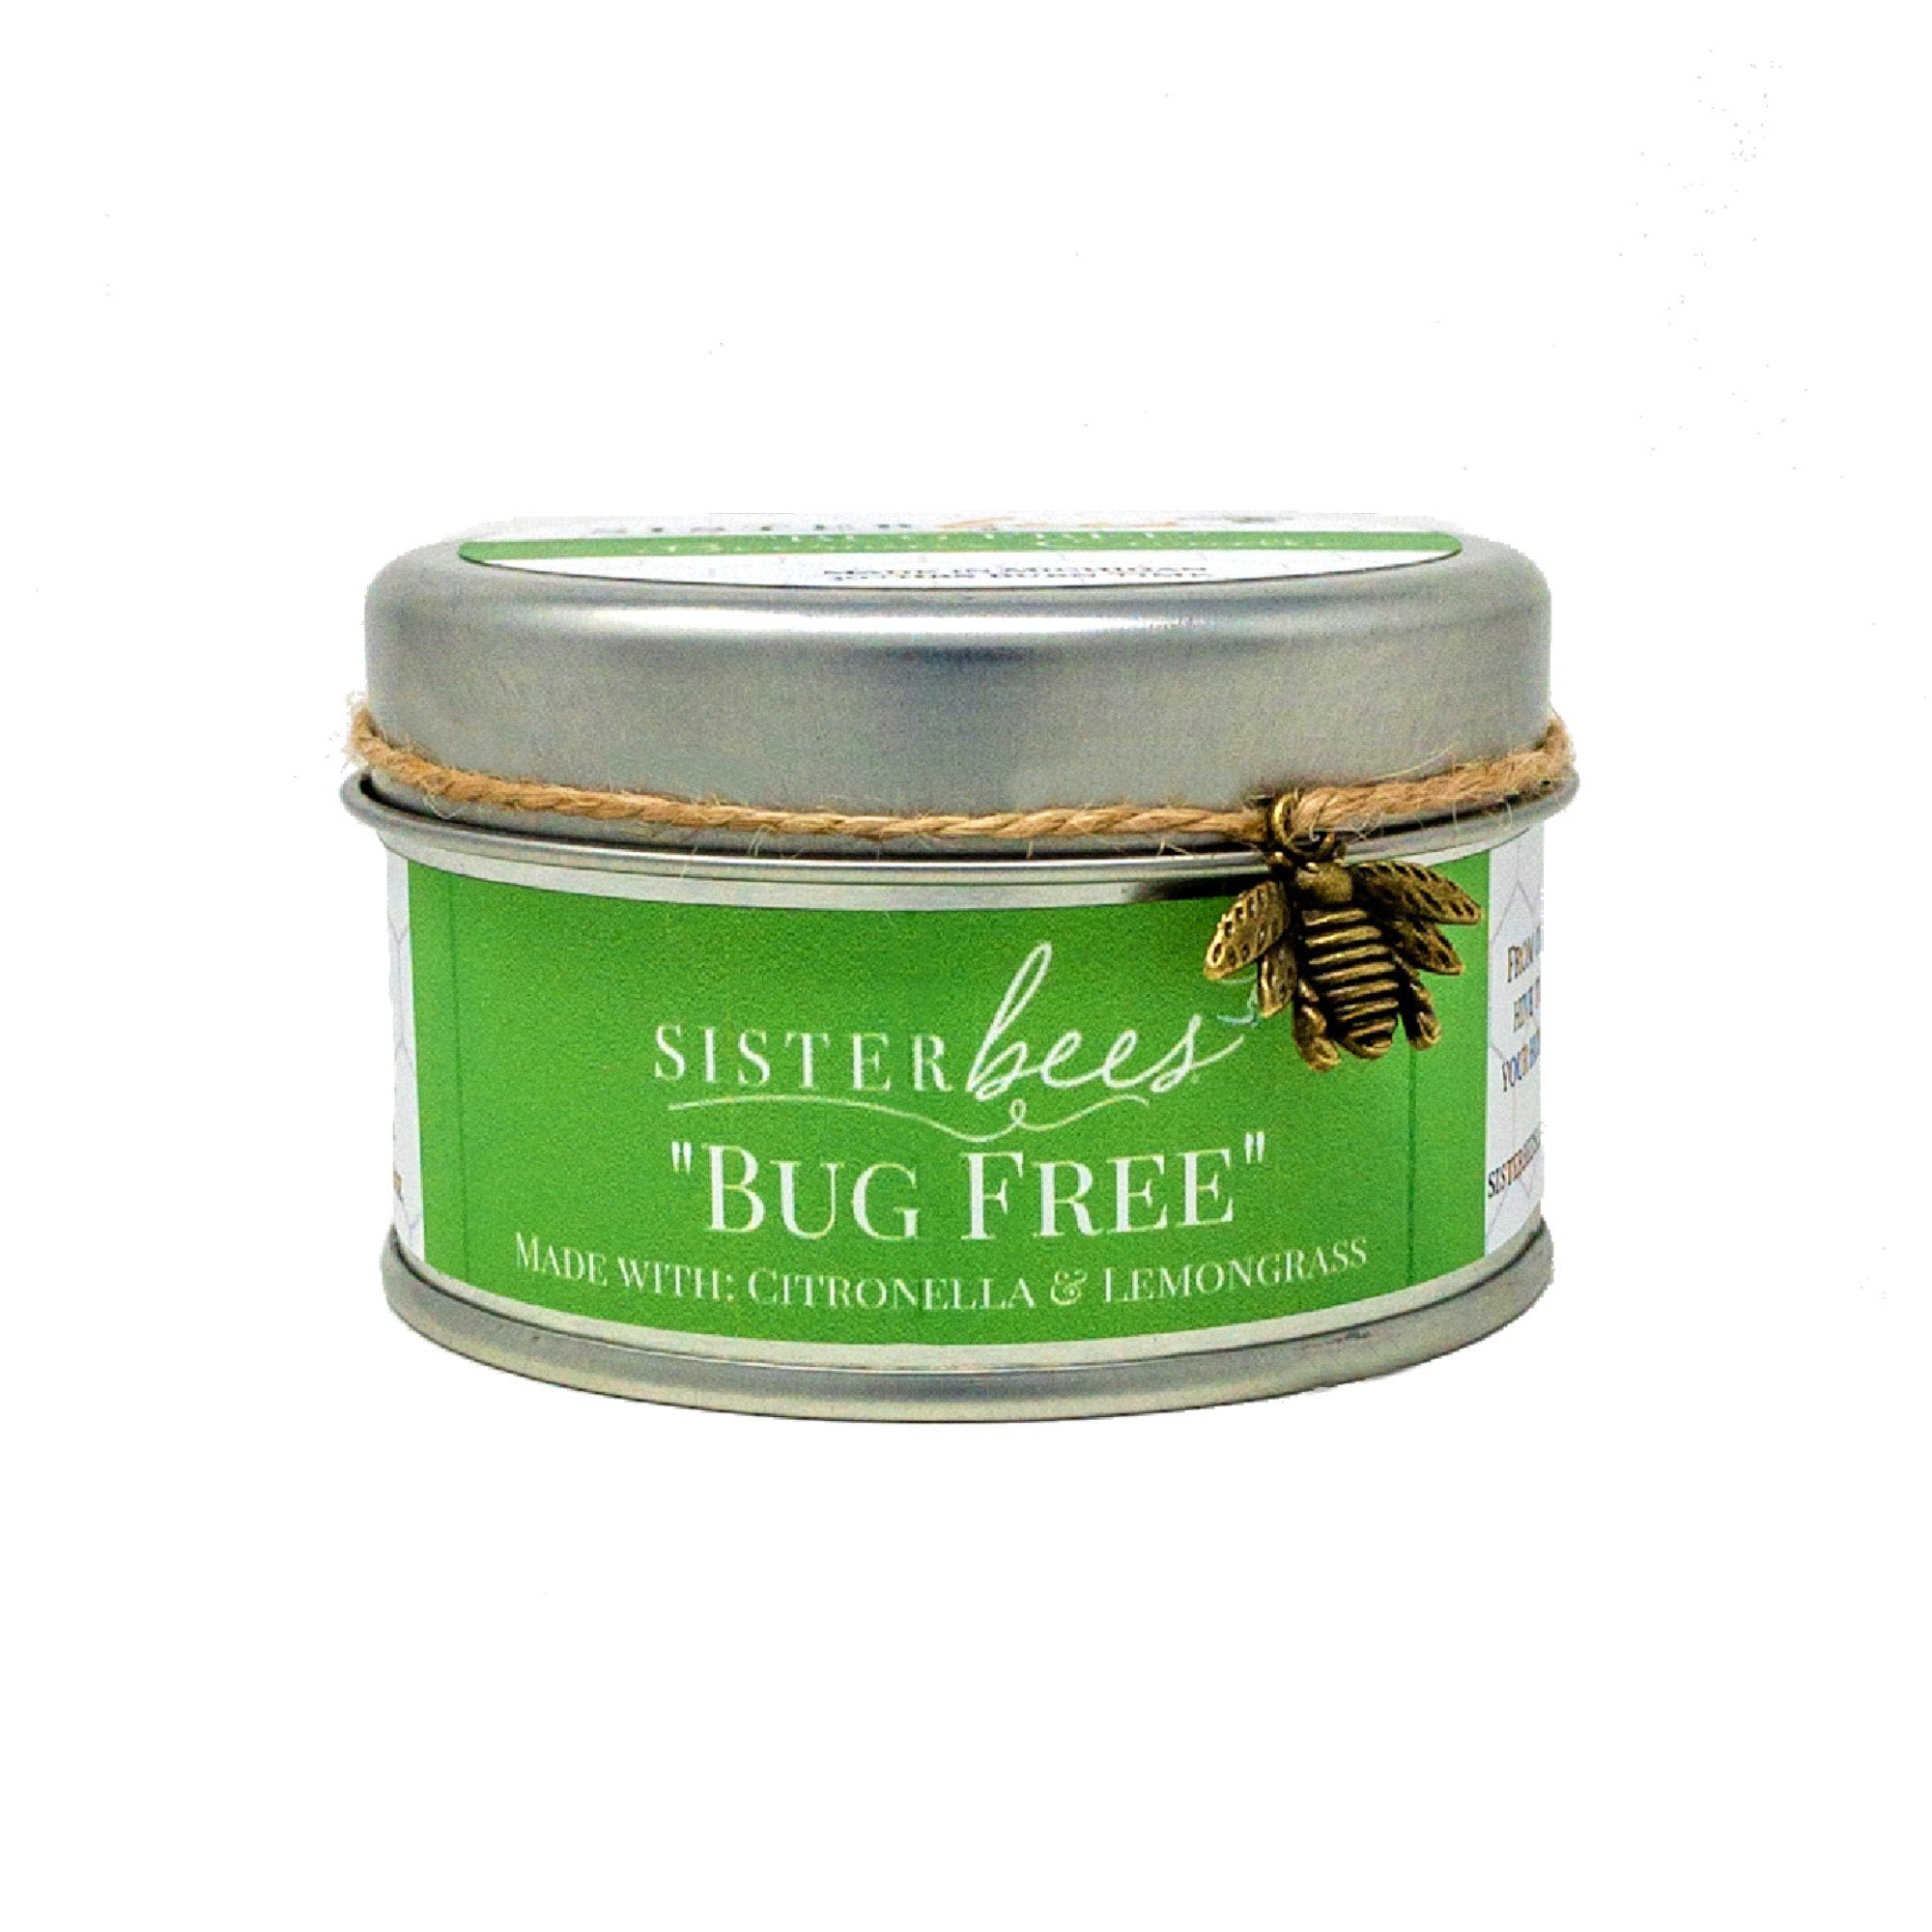 Beeswax Candle - Bug Free (with Citronella & Lemongrass) - SuperMom Headquarters